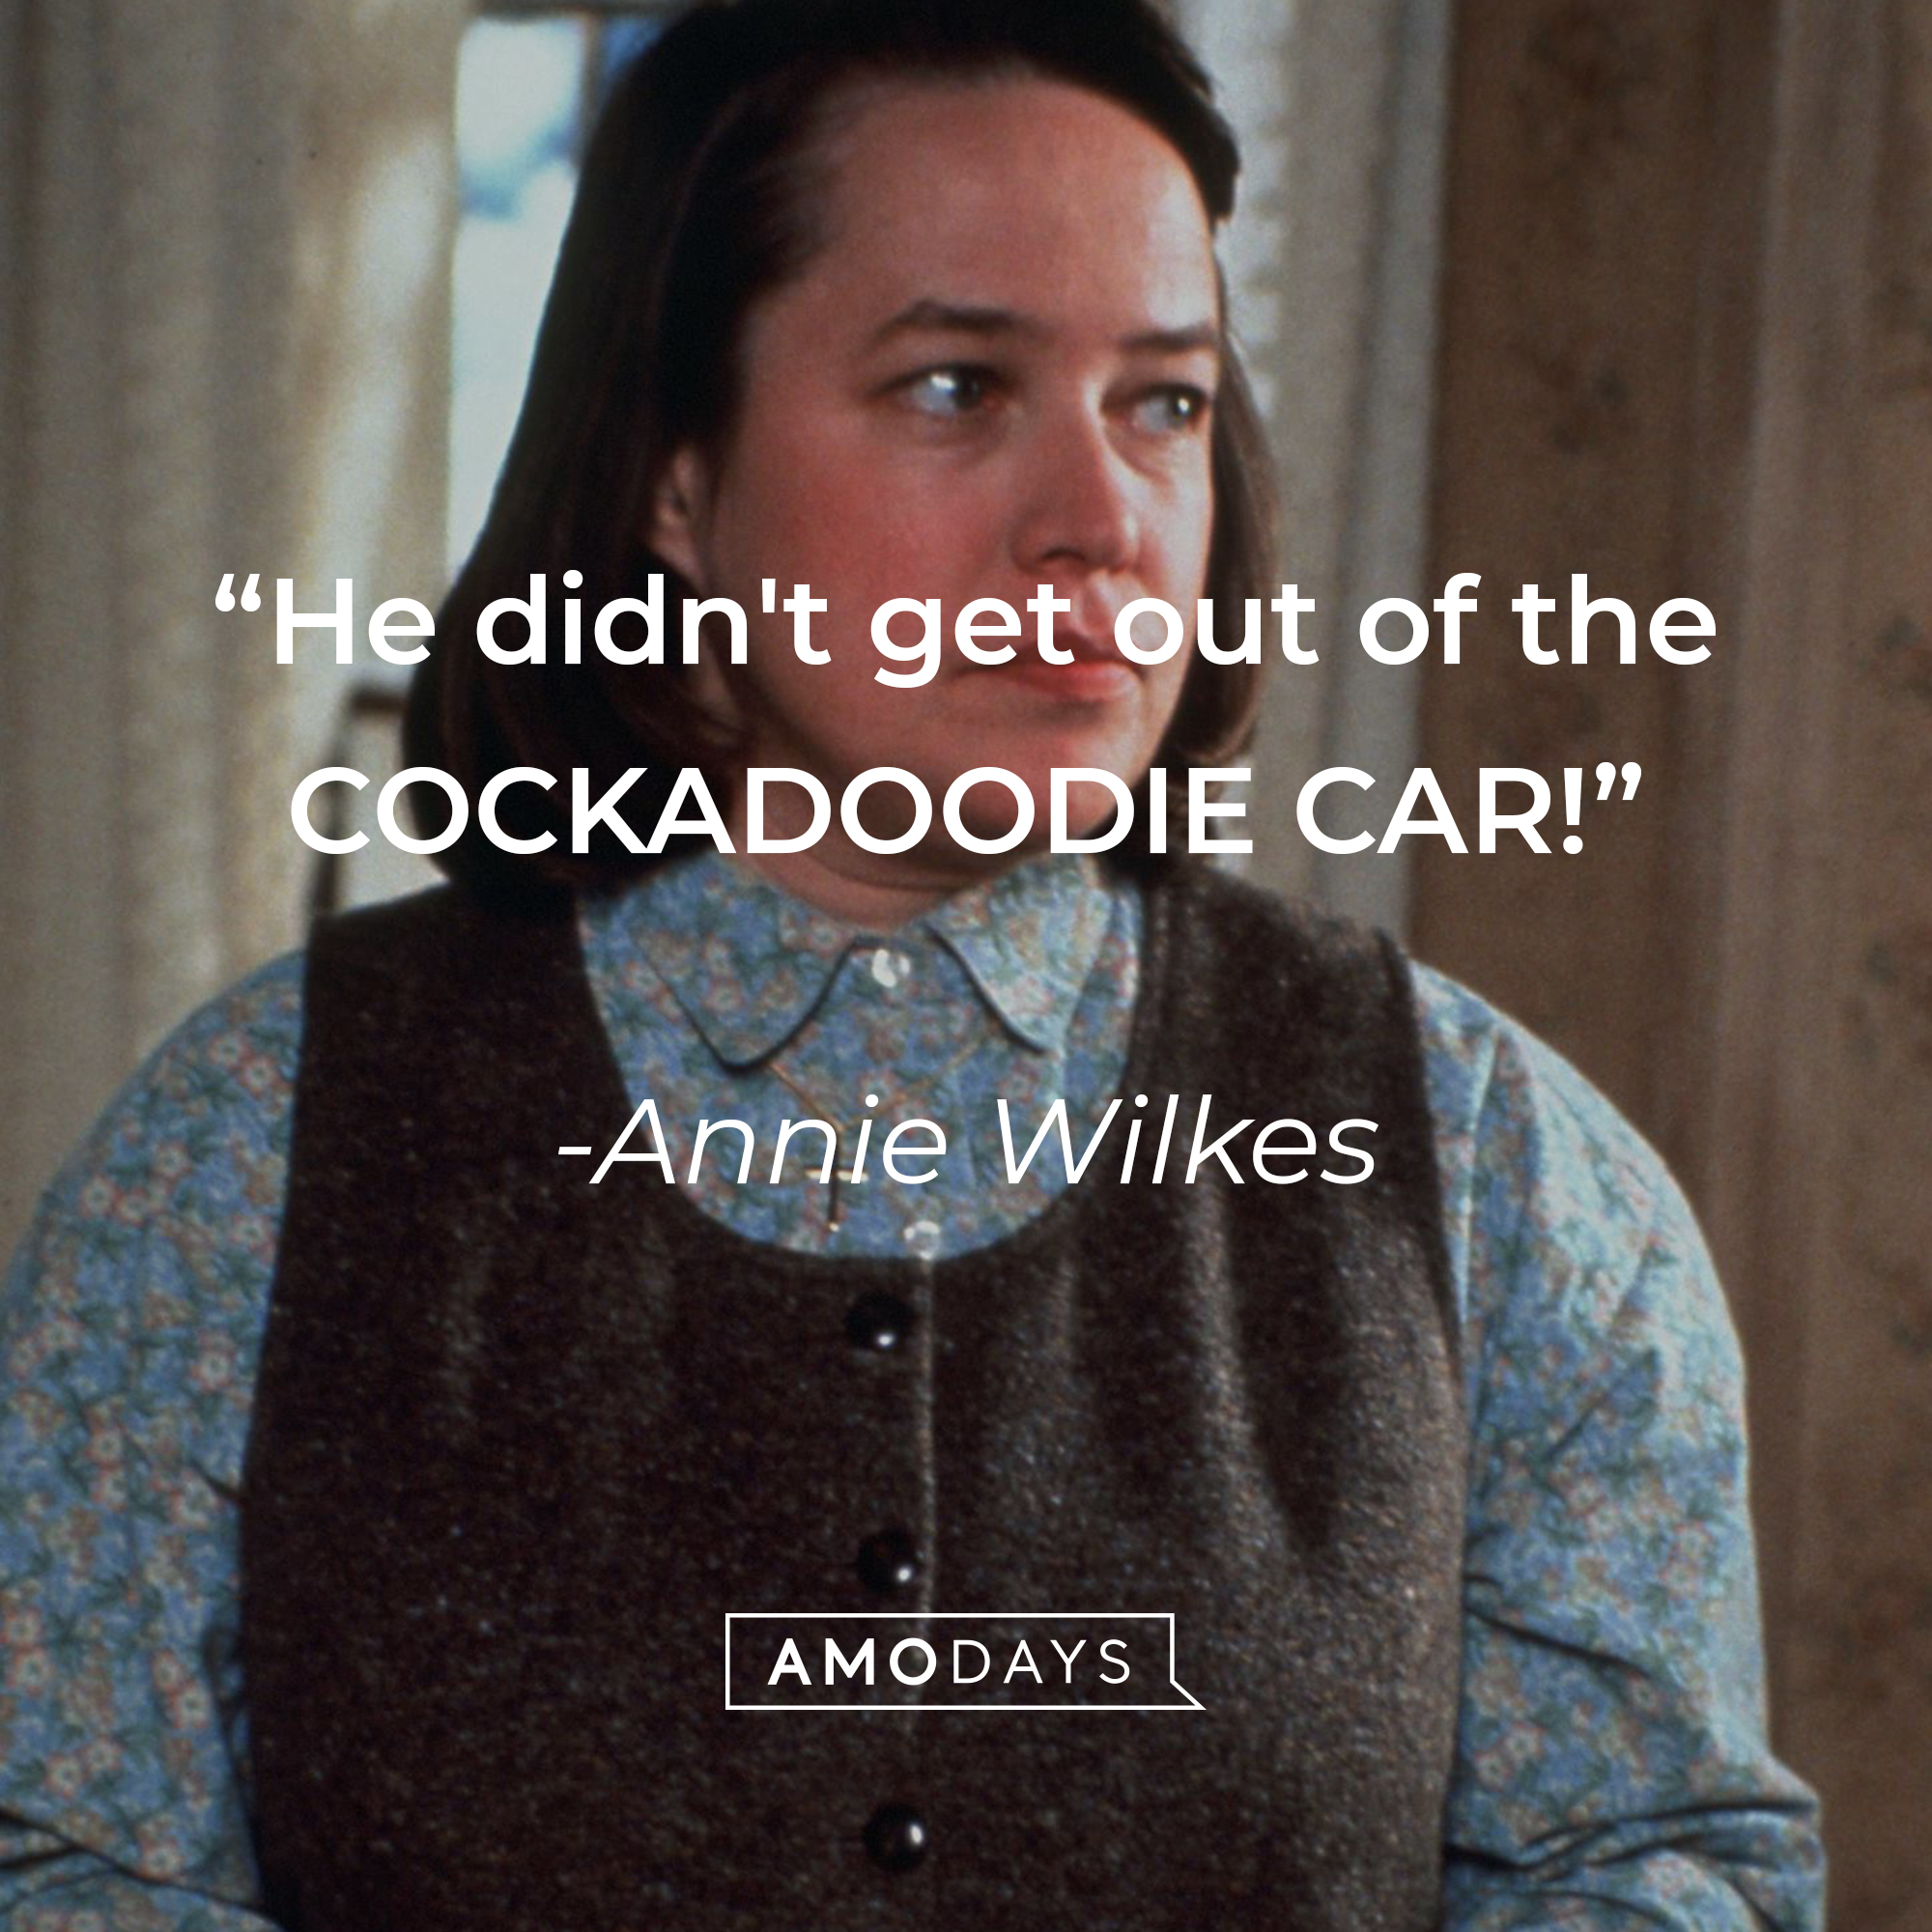 Annie Wilkes' quote: “He didn't get out of the COCKADOODIE CAR!” | Source: facebook.com/MiseryMovie